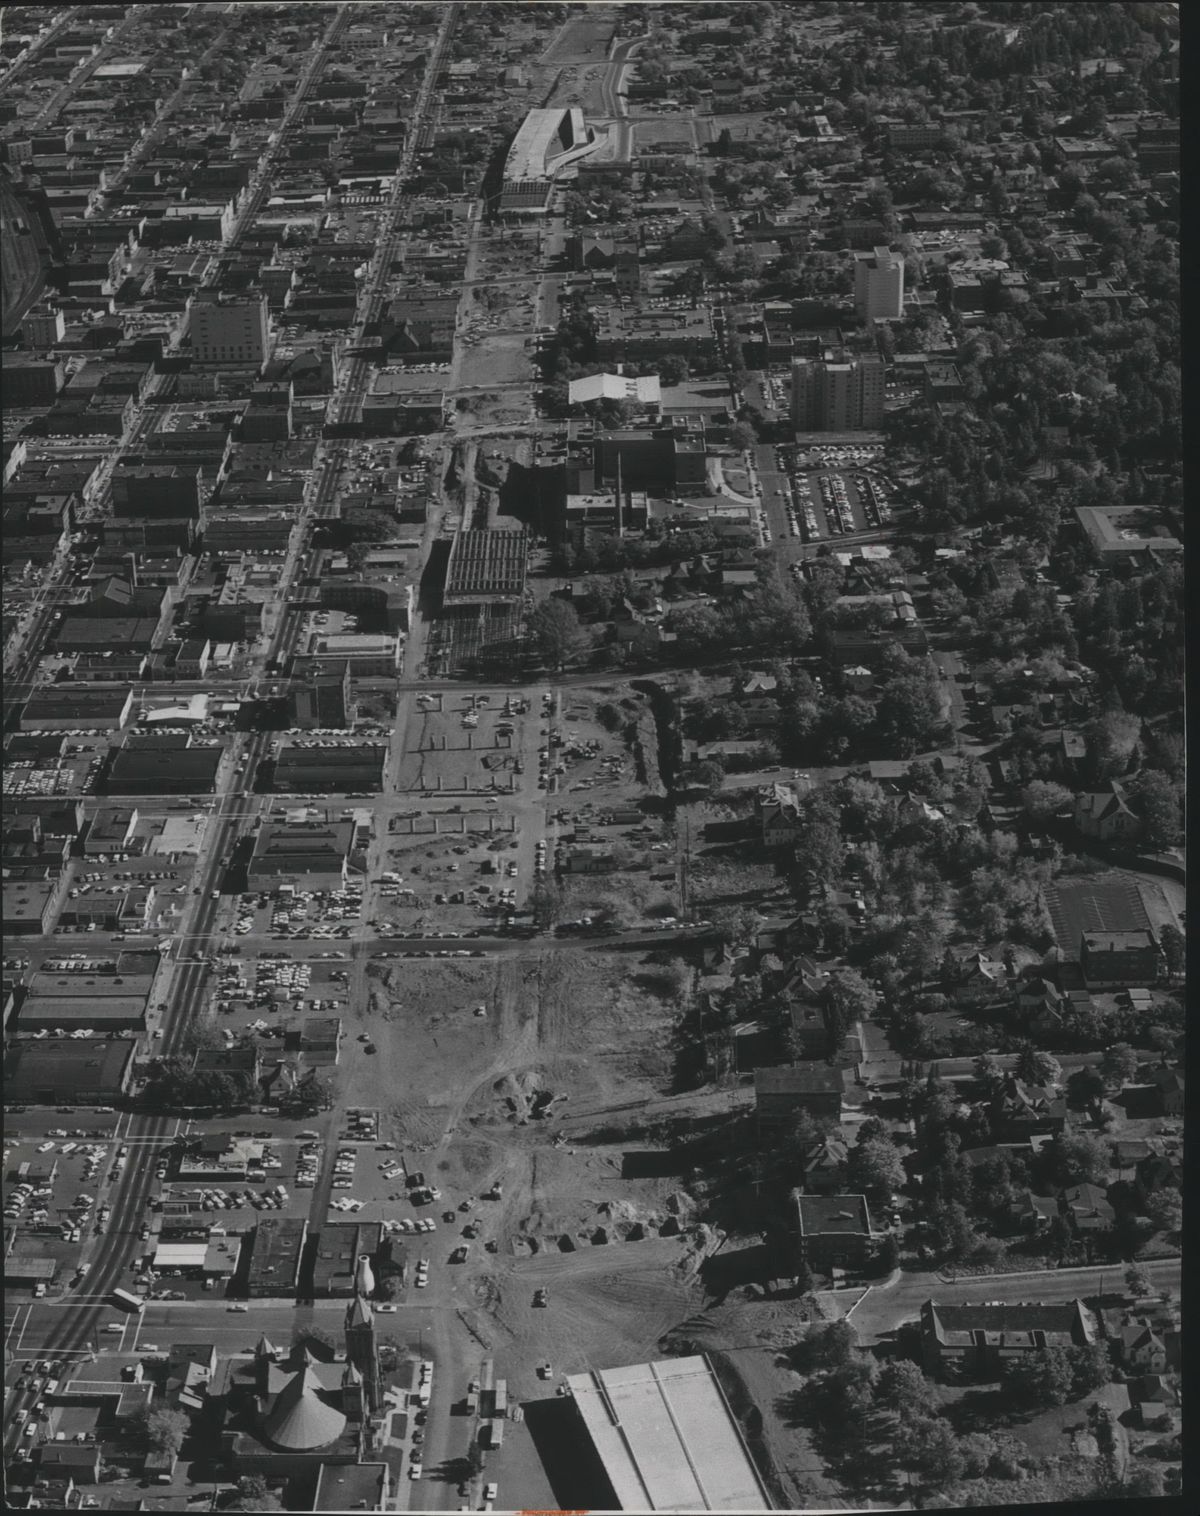 Interstate 90, which cut roughly along Fourth Avenue, was advancing through downtown Spokane in this 1967 photo. At the bottom is Cedar Street and First Presbyterian Church. Northbound and southbound traffic was realigned on the western part of the South Hill as a result of I-90’s construction. Cedar Street had previously been the main arterial on that part of the South Hill to get to downtown until traffic was shifted to Maple and Walnut. (Ed Gilkey / SR)